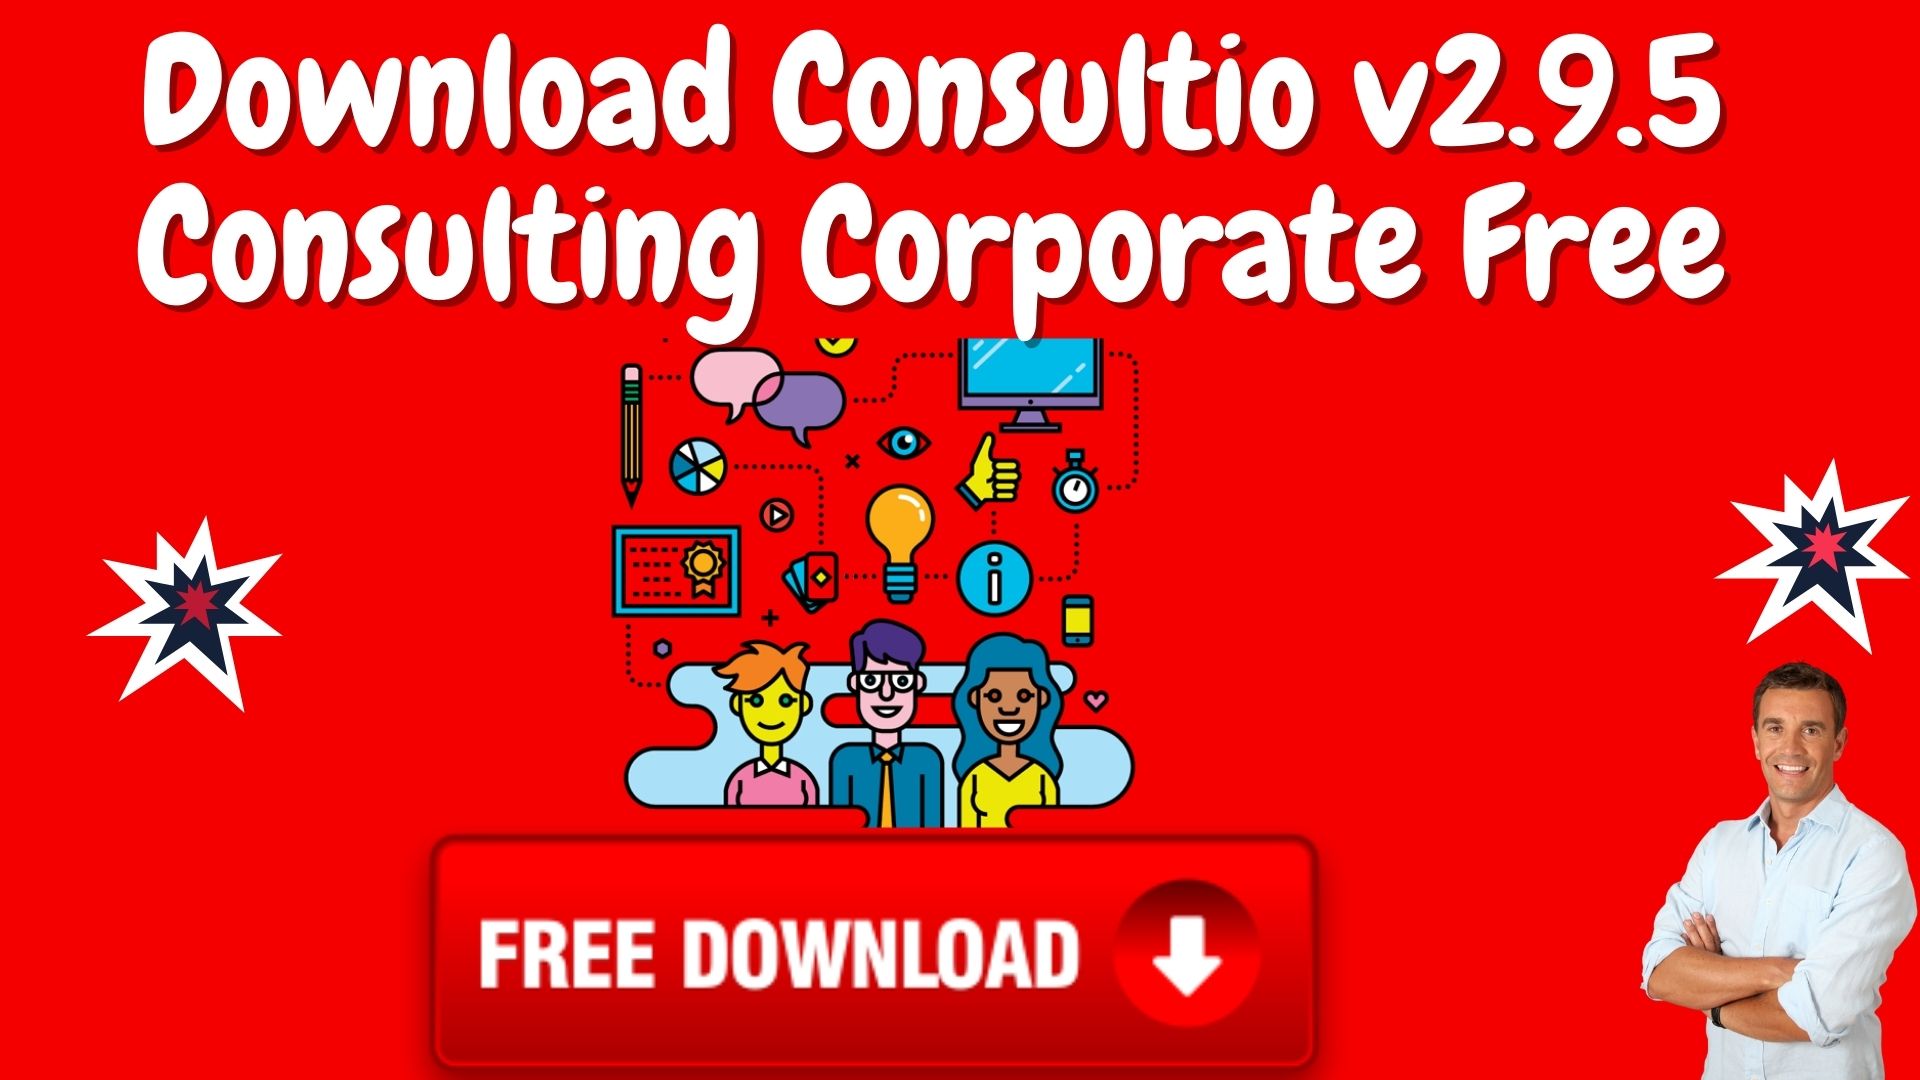 Download Consultio V2.9.5 Consulting Corporate Free